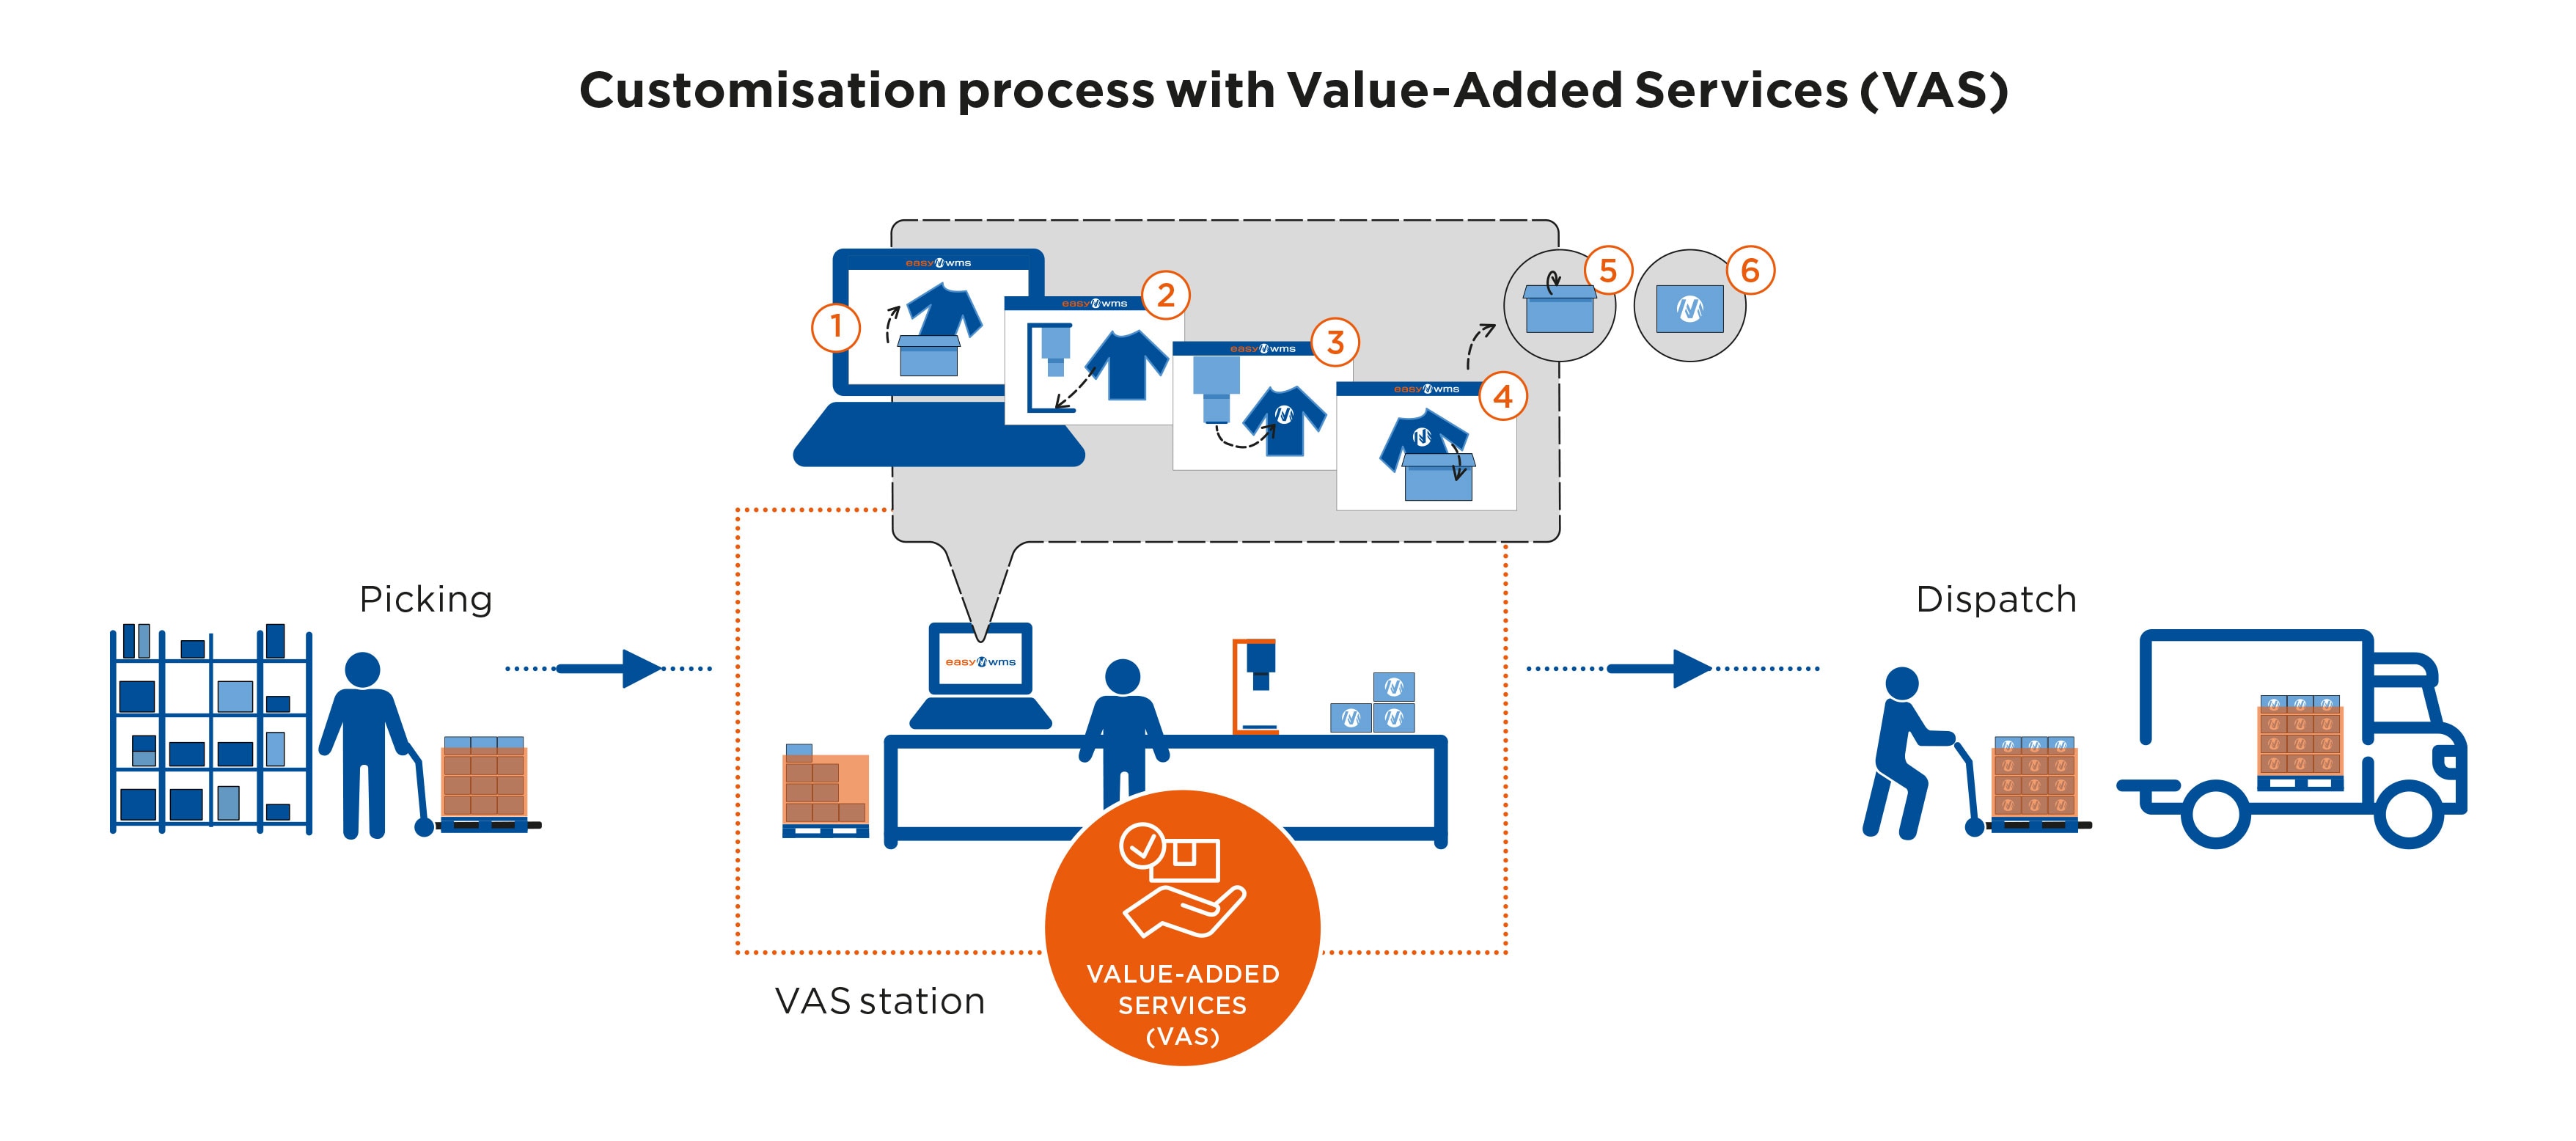 Customization process with Value-Added Services (VAS)